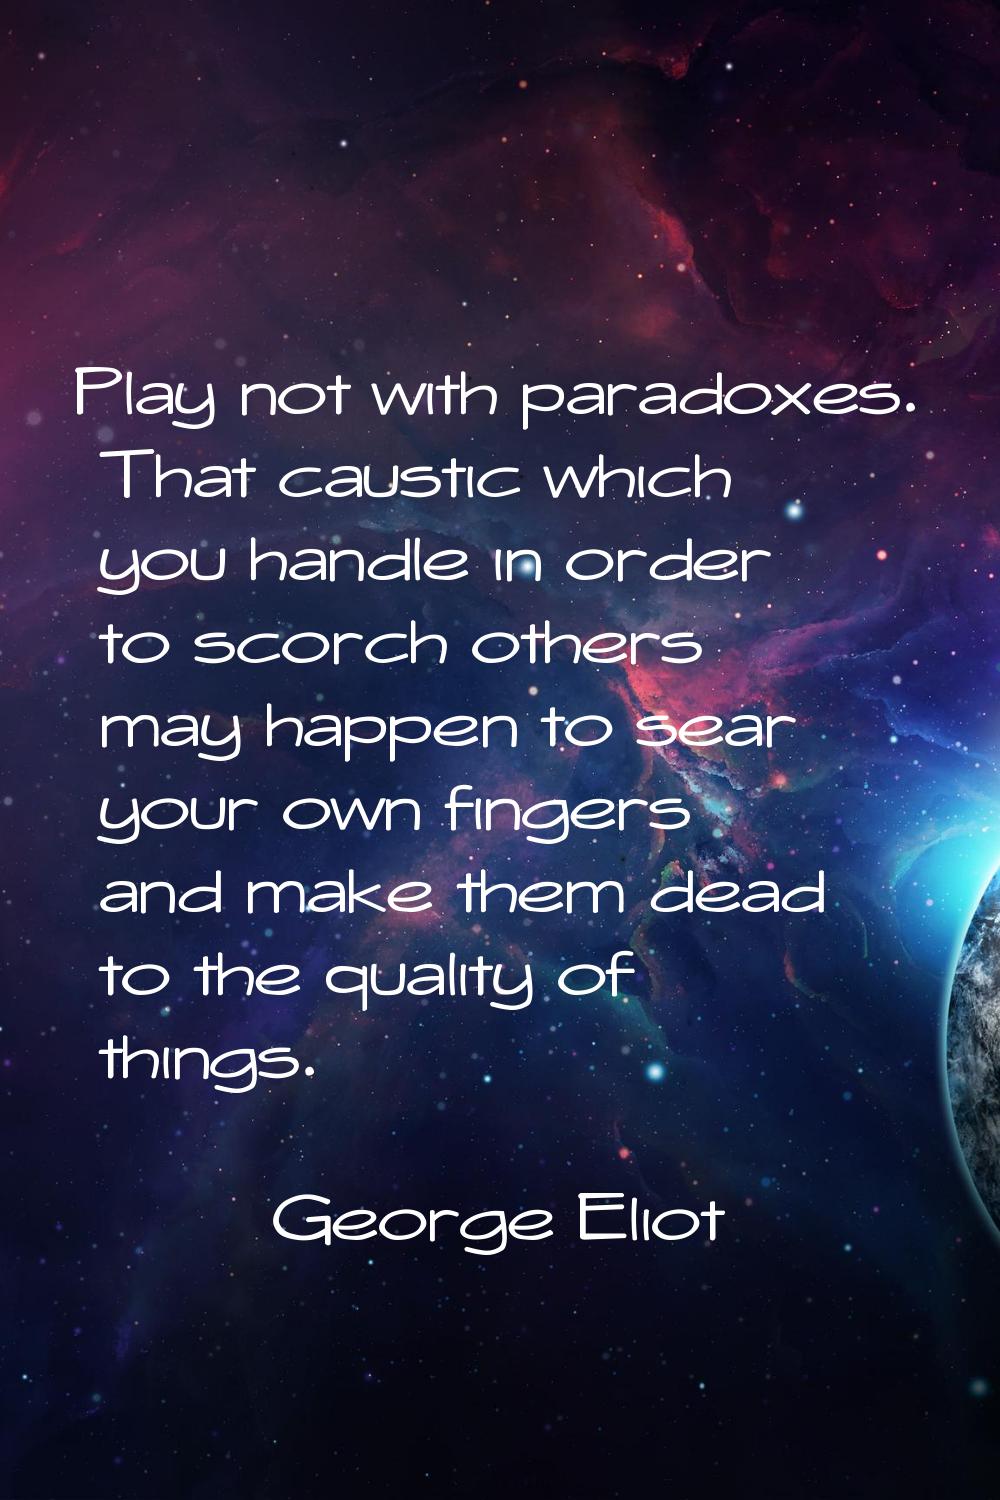 Play not with paradoxes. That caustic which you handle in order to scorch others may happen to sear